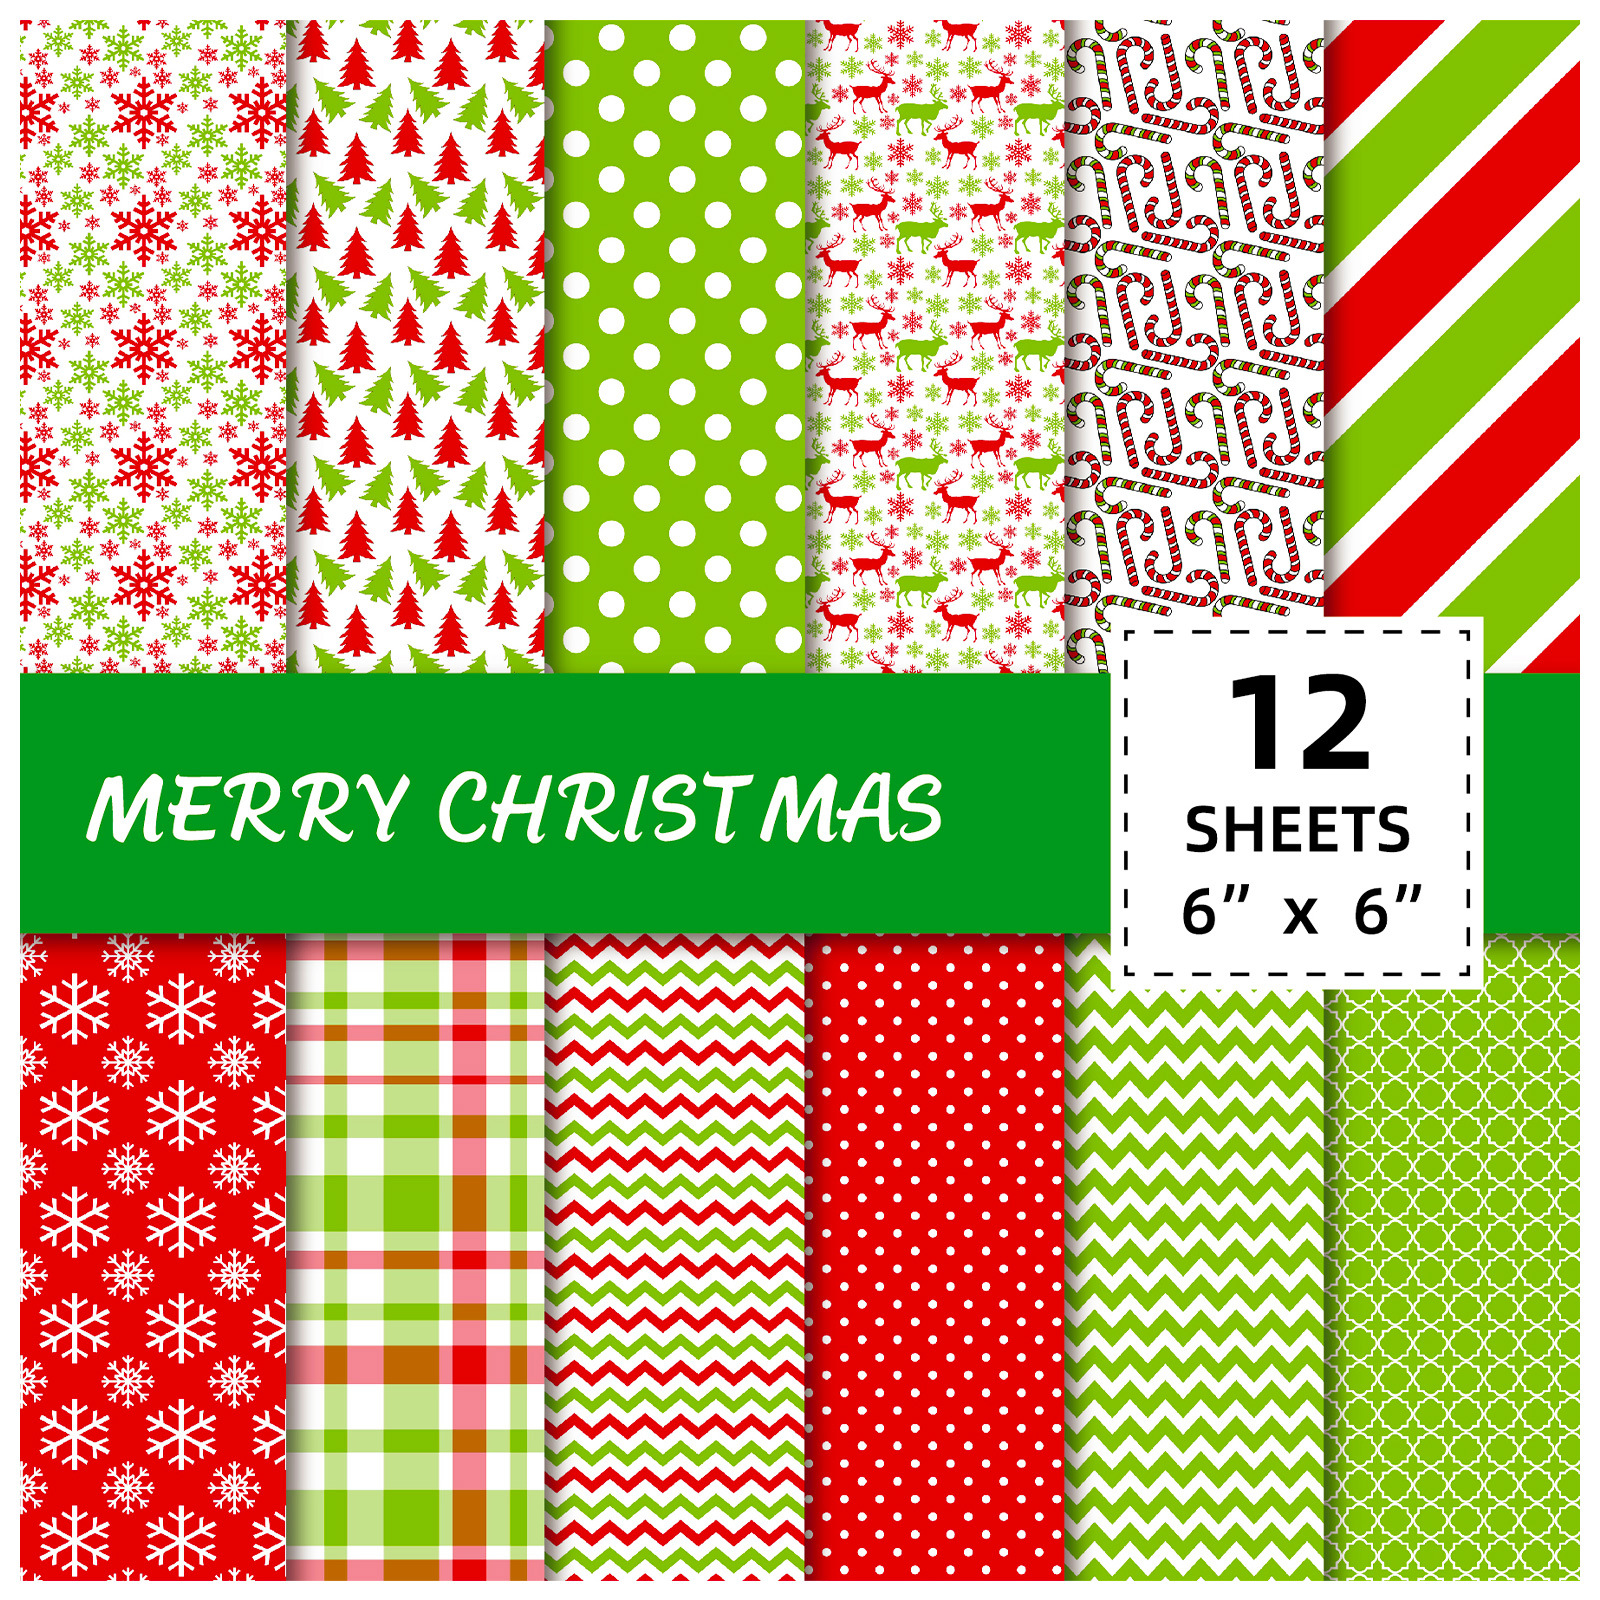 Christmas Floral Scrapbooking Kit - 12 Sheets Assorted Craft Paper Pack